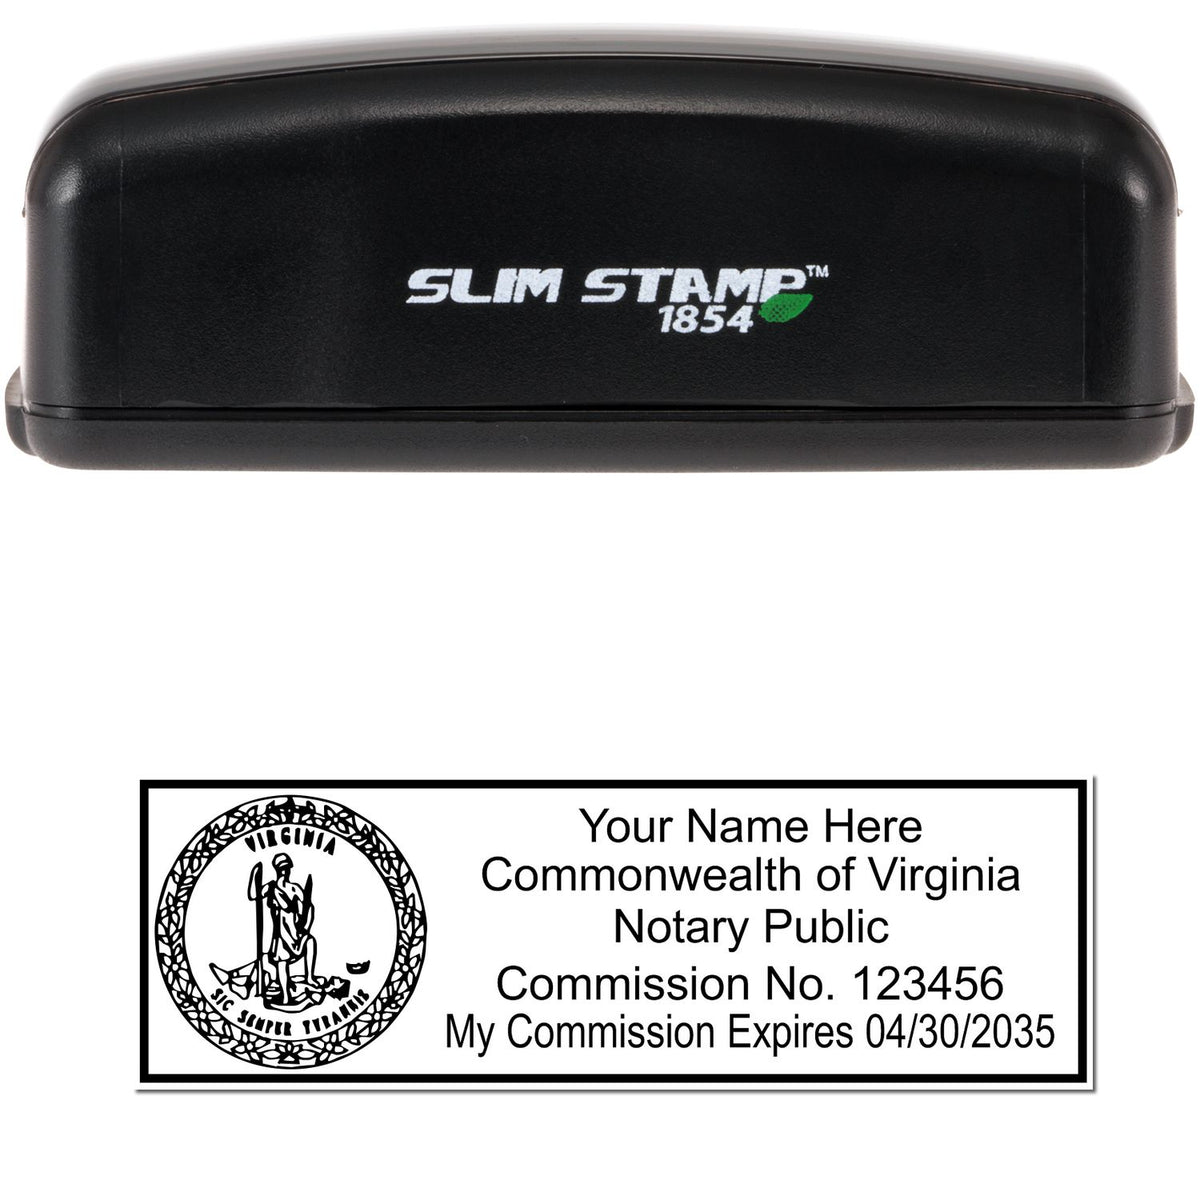 The main image for the Slim Pre-Inked State Seal Notary Stamp for Virginia depicting a sample of the imprint and electronic files